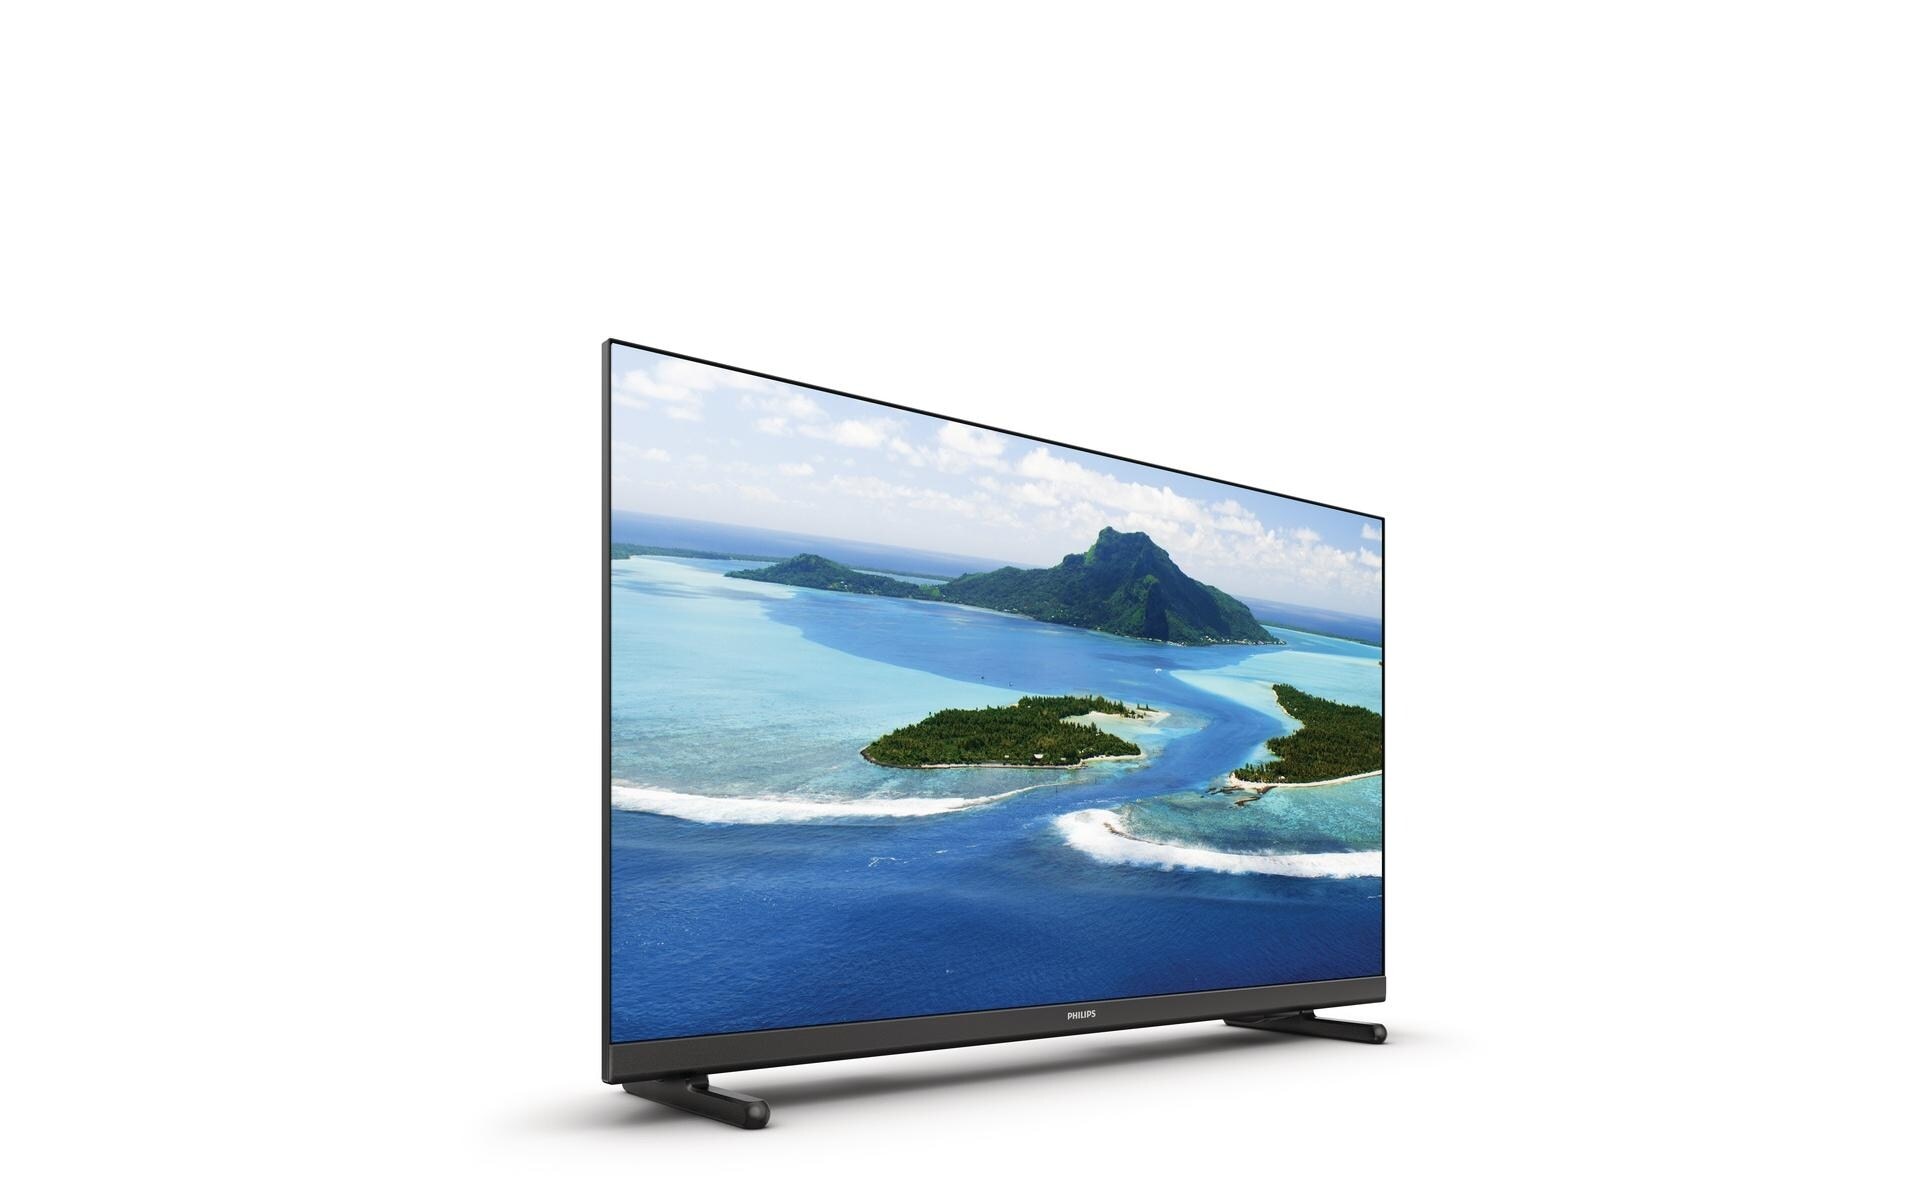 Philips LCD-LED Fernseher »24PHS5507/12, 24 60 LED-«, WXGA sur cm/24 Zoll, Trouver